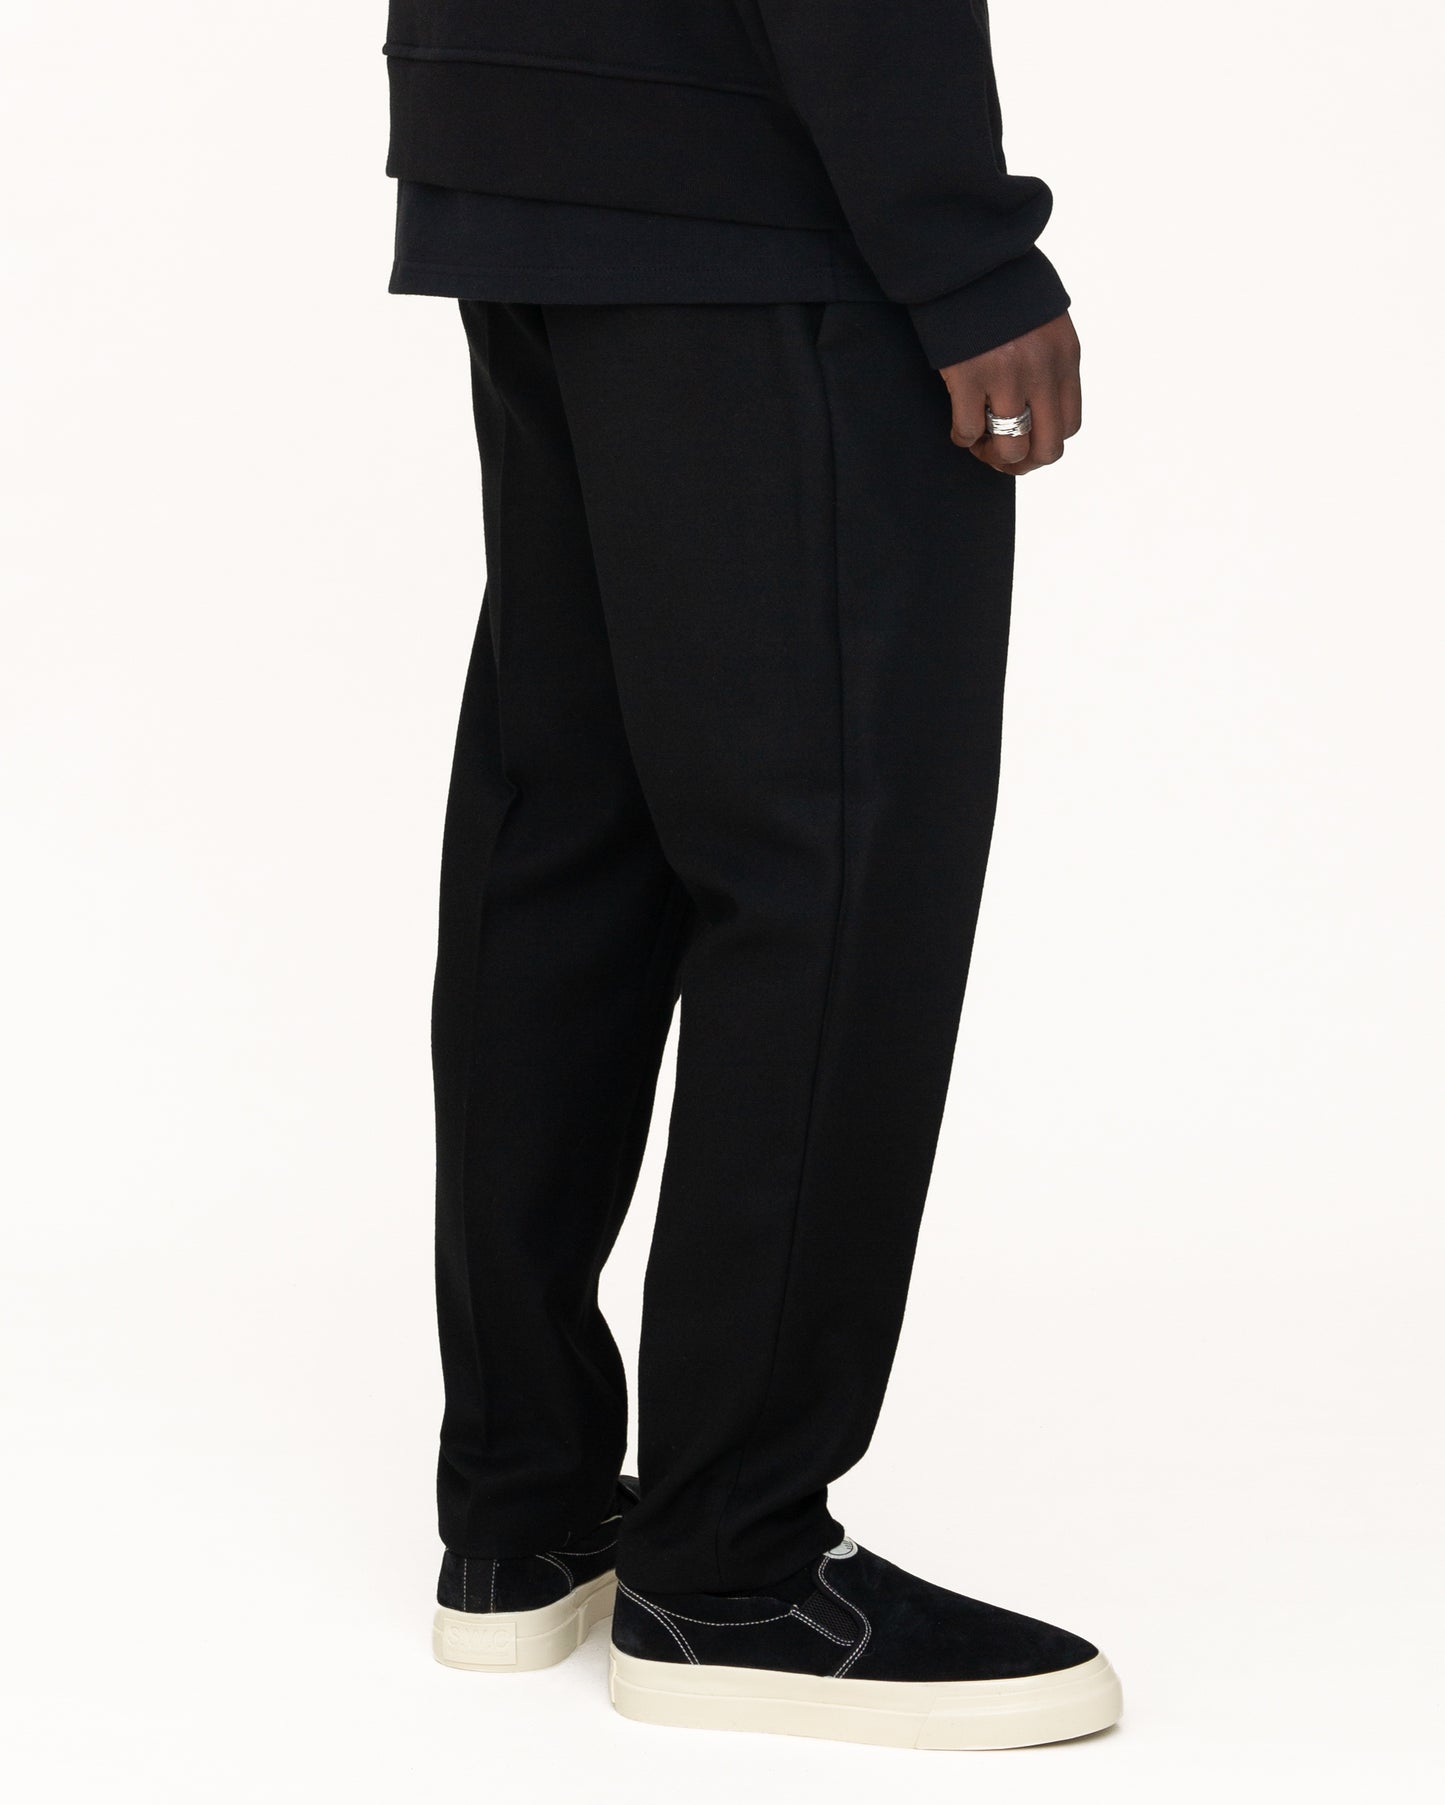 mens trousers, black trousers, side